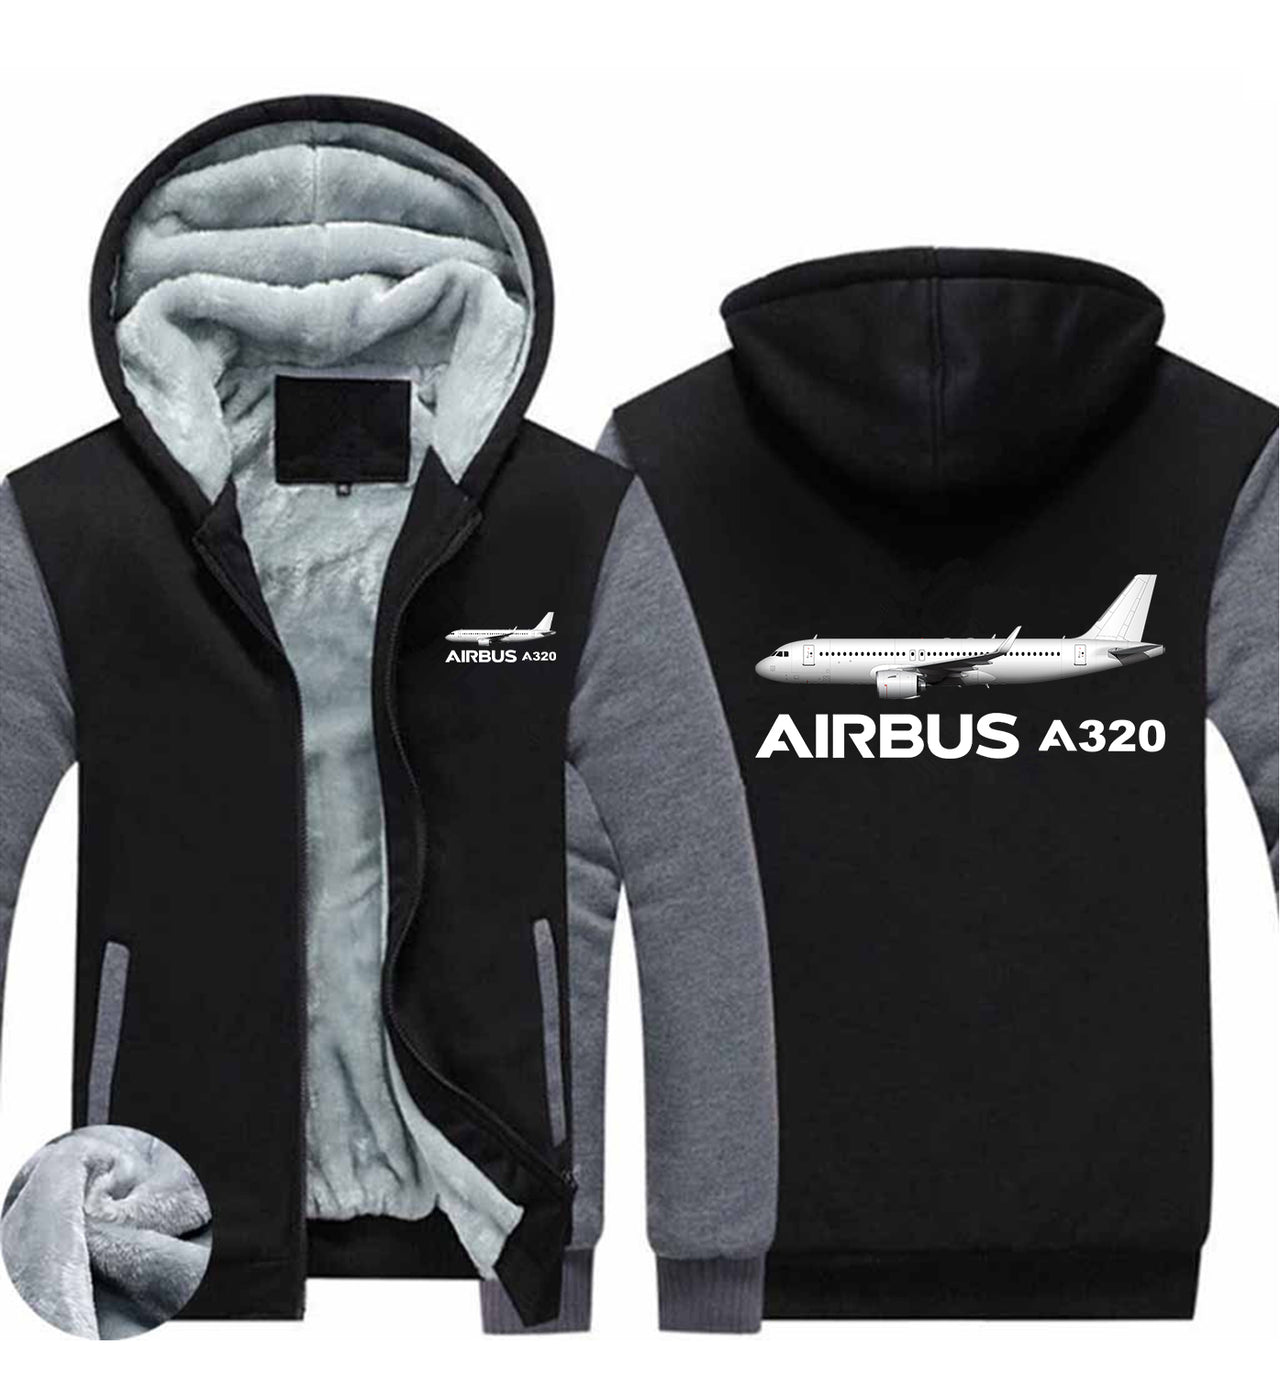 The Airbus A320 Designed Zipped Sweatshirts